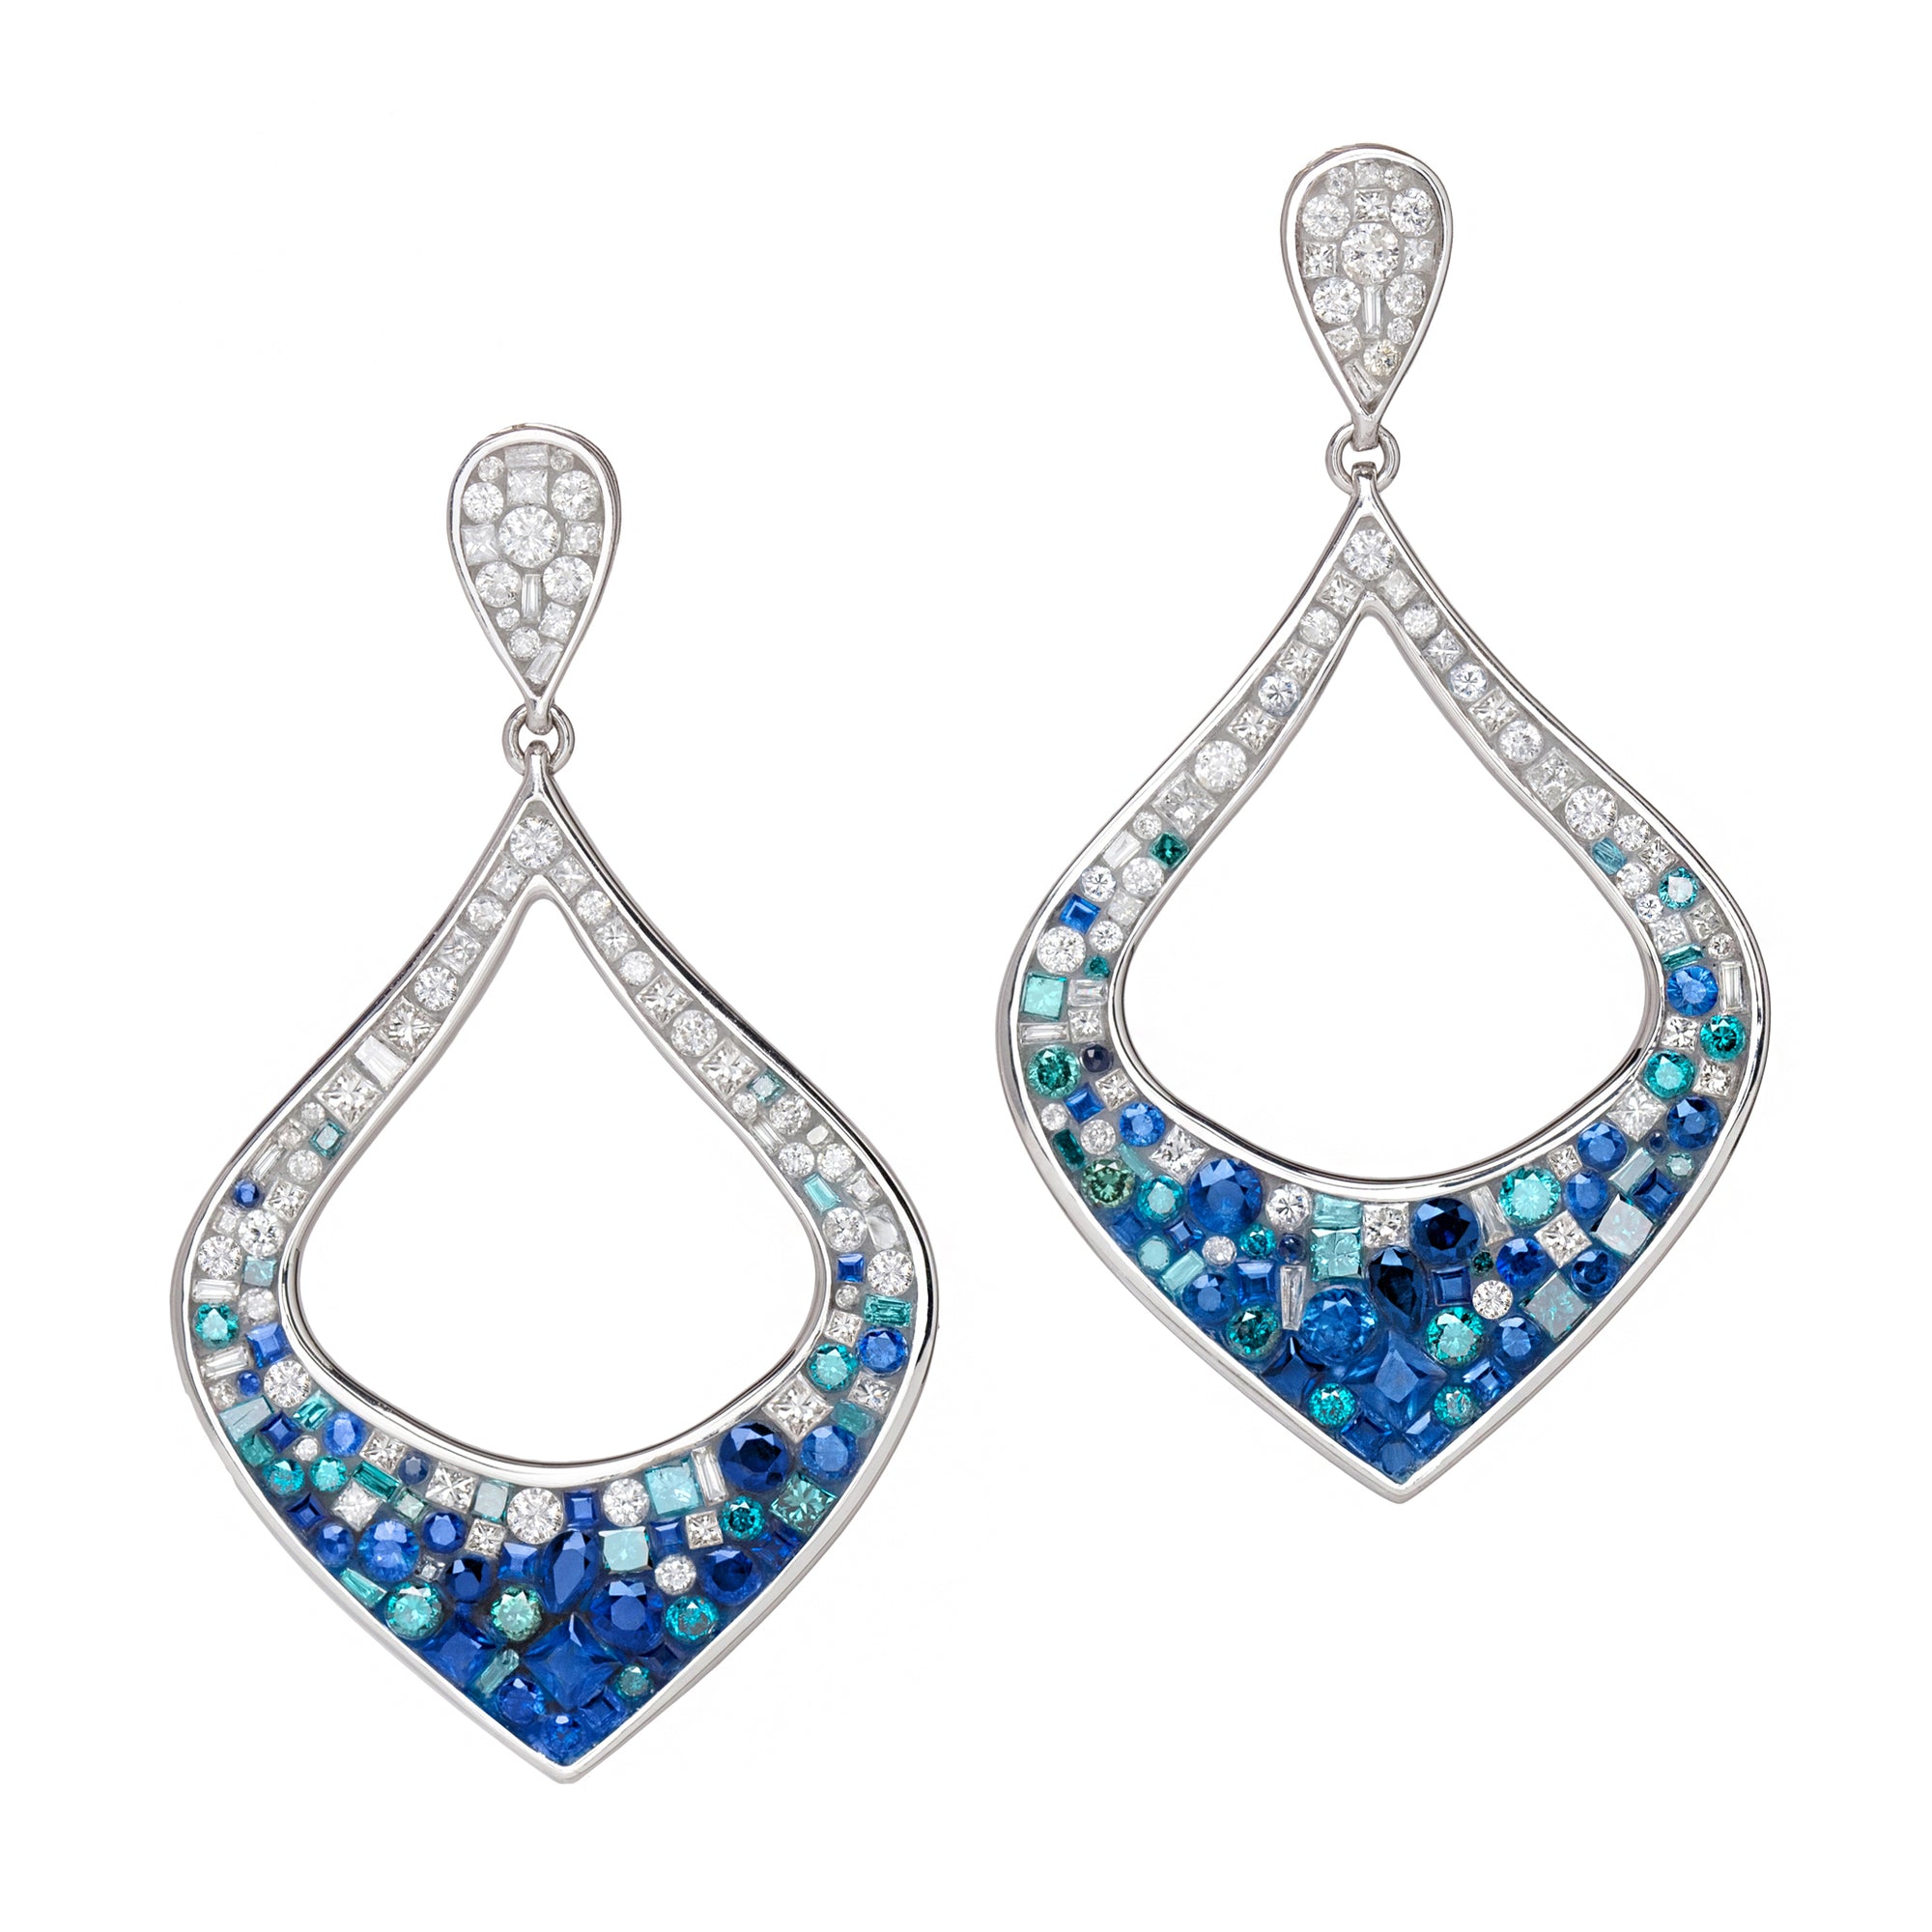 Blue Ombre Petal Sapphire & Diamond Earrings by Pleve available at Talisman Collection Fine Jewelers in El Dorado Hills, CA and online. Specs: 5.15 cttw white & color enhanced diamonds, natural sapphire, 18k white gold 